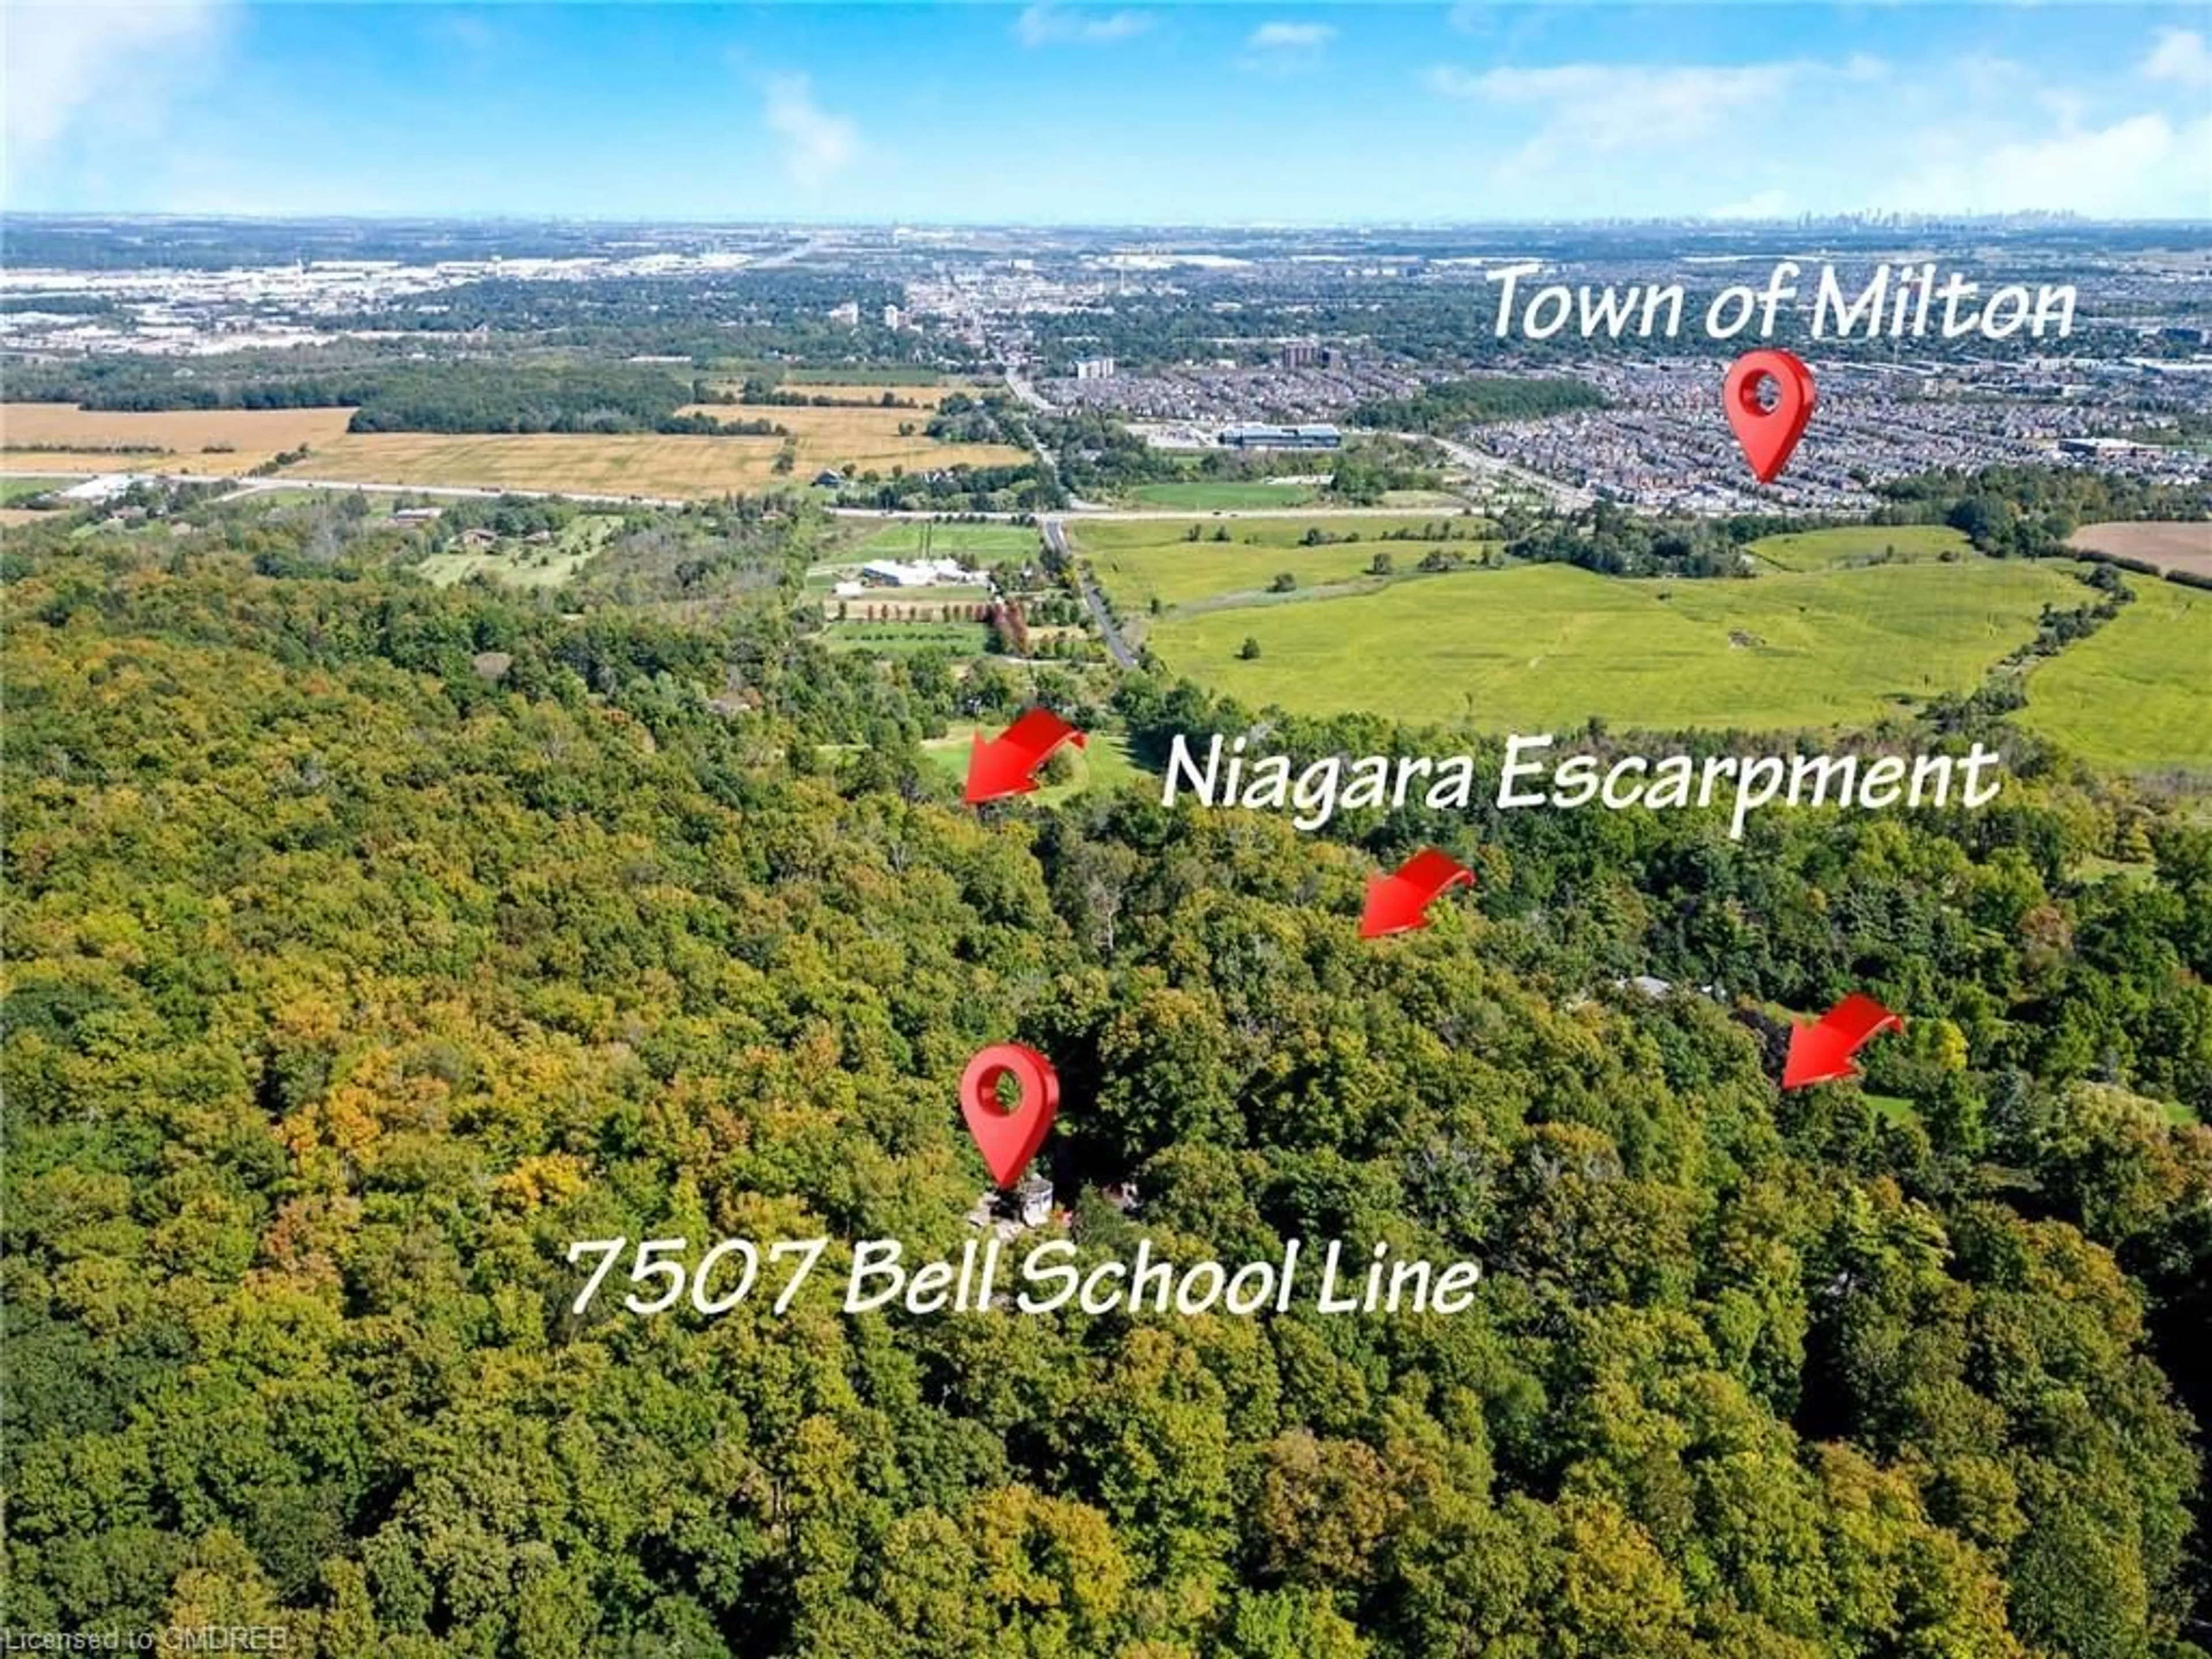 Picture of a map for 7507 Bell School Line, Milton Ontario L9T 2Y1